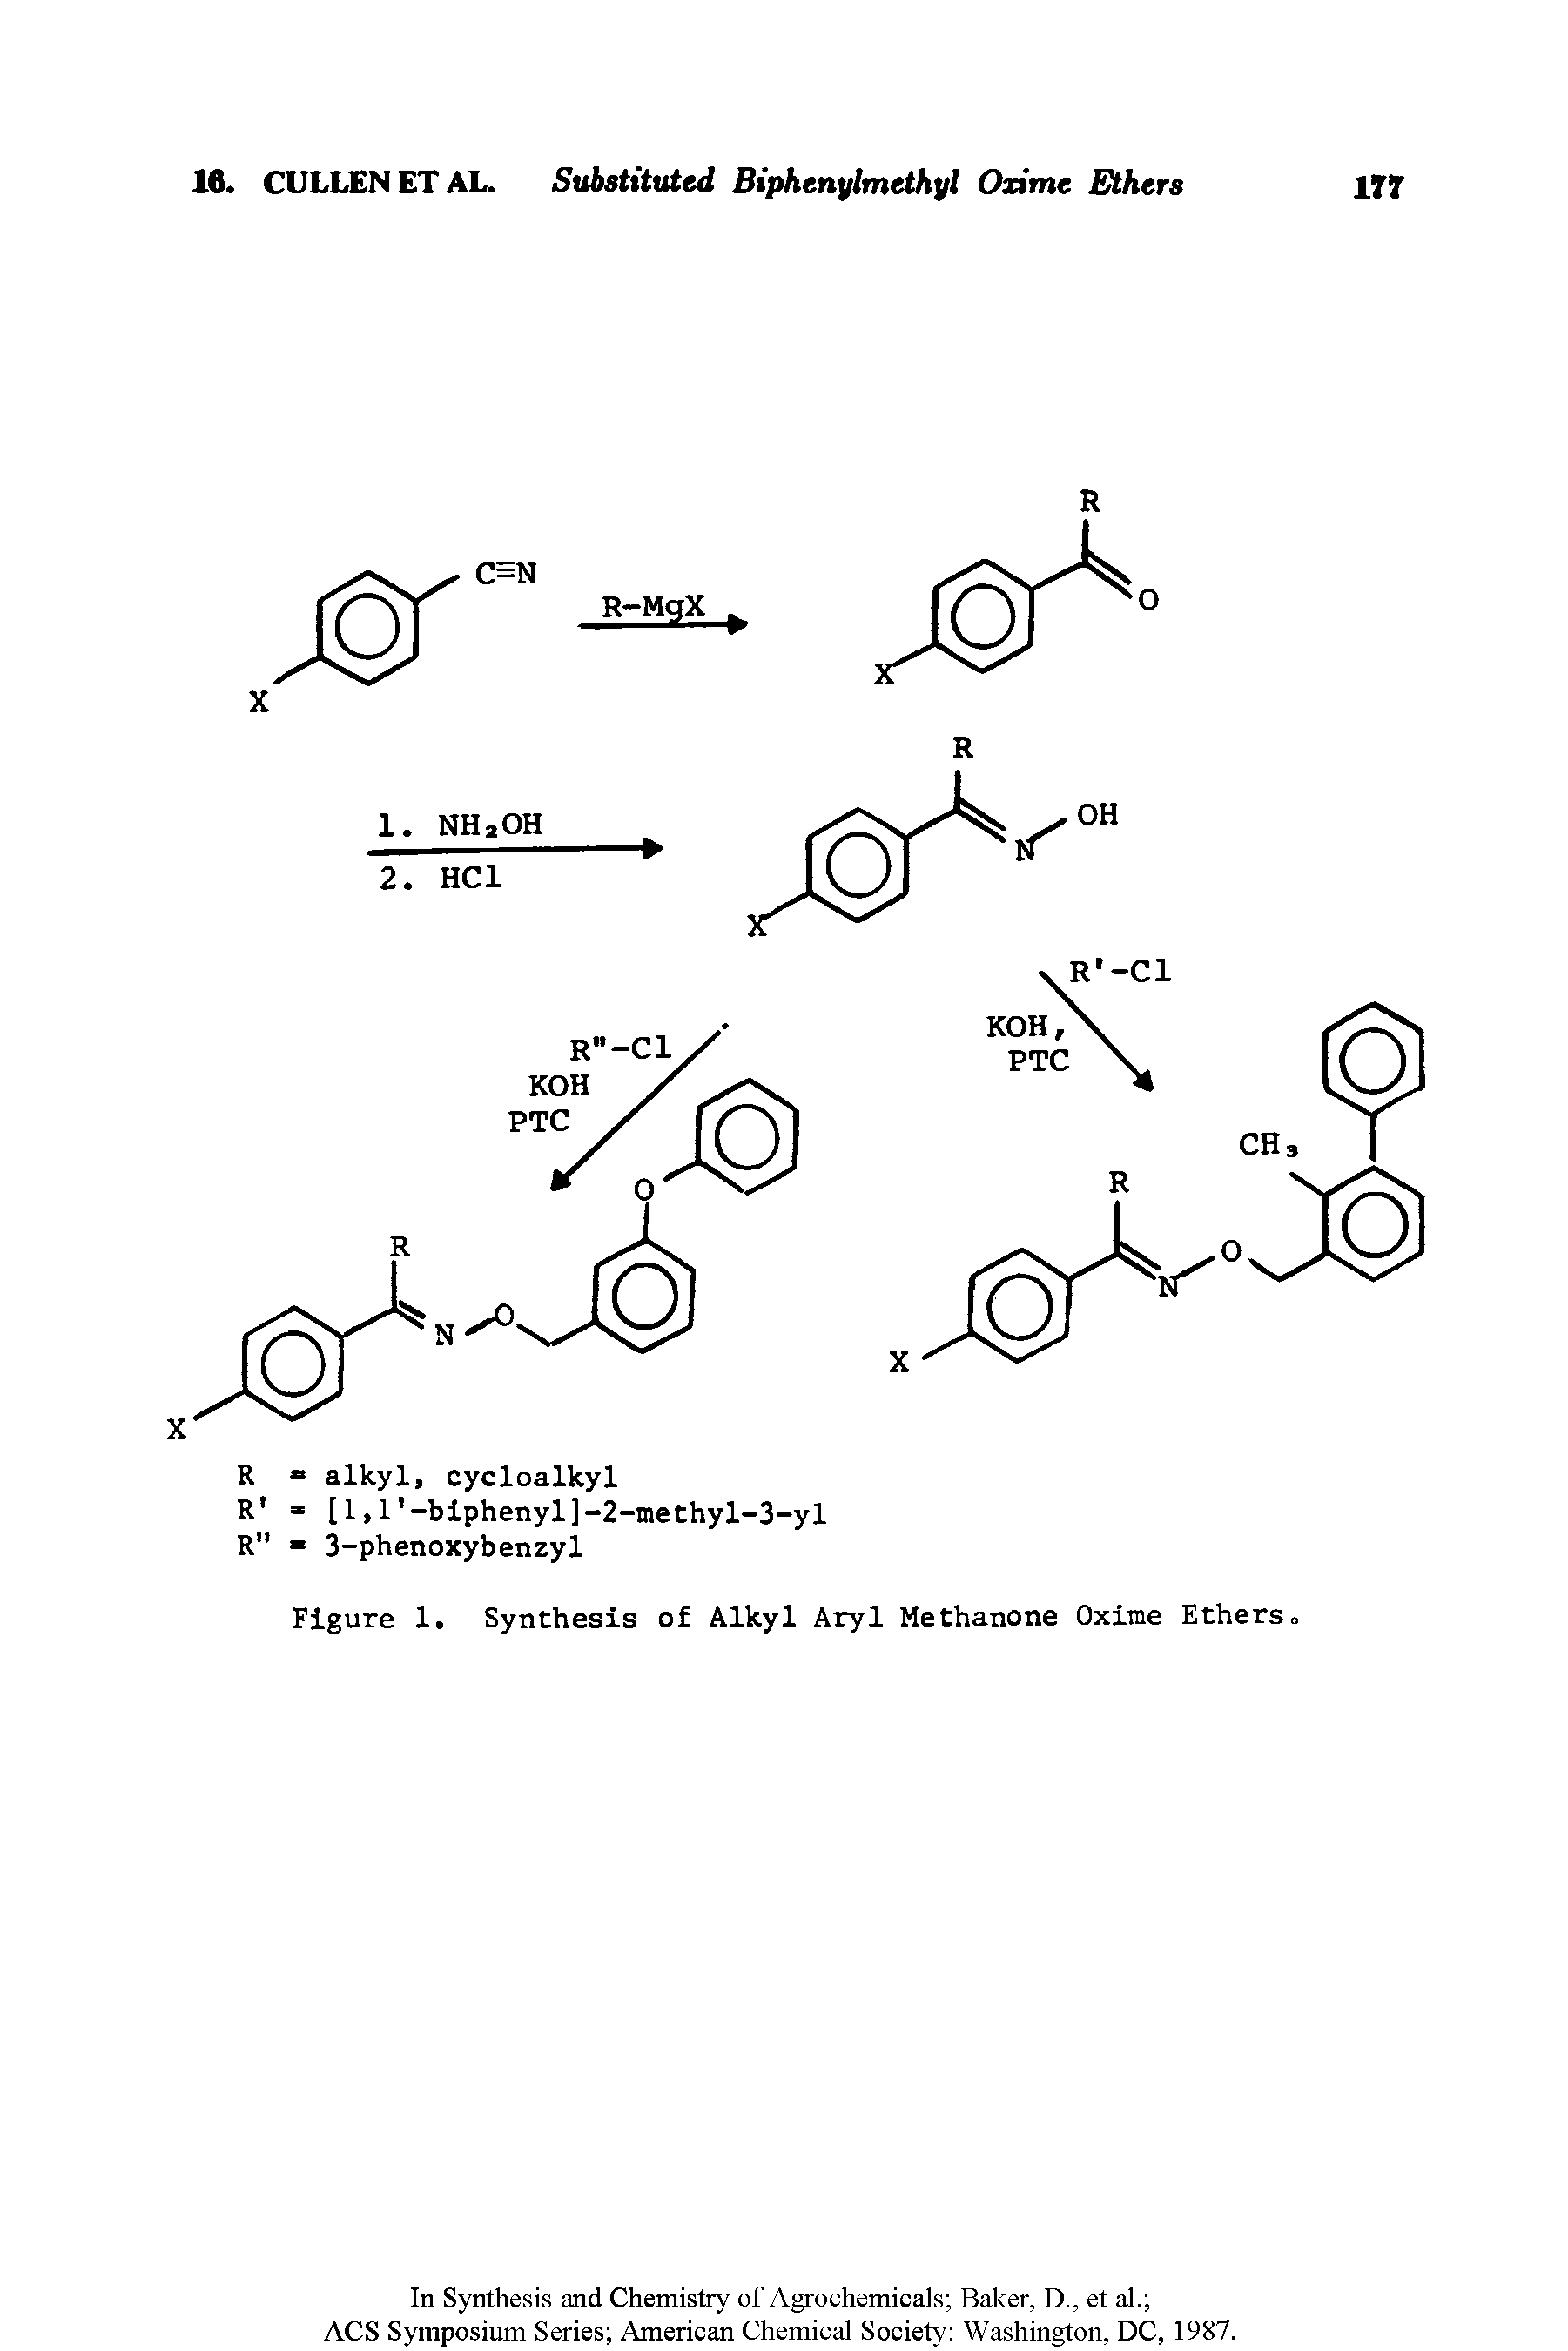 Figure 1. Synthesis of Alkyl Aryl Methanone Oxime Ethers.